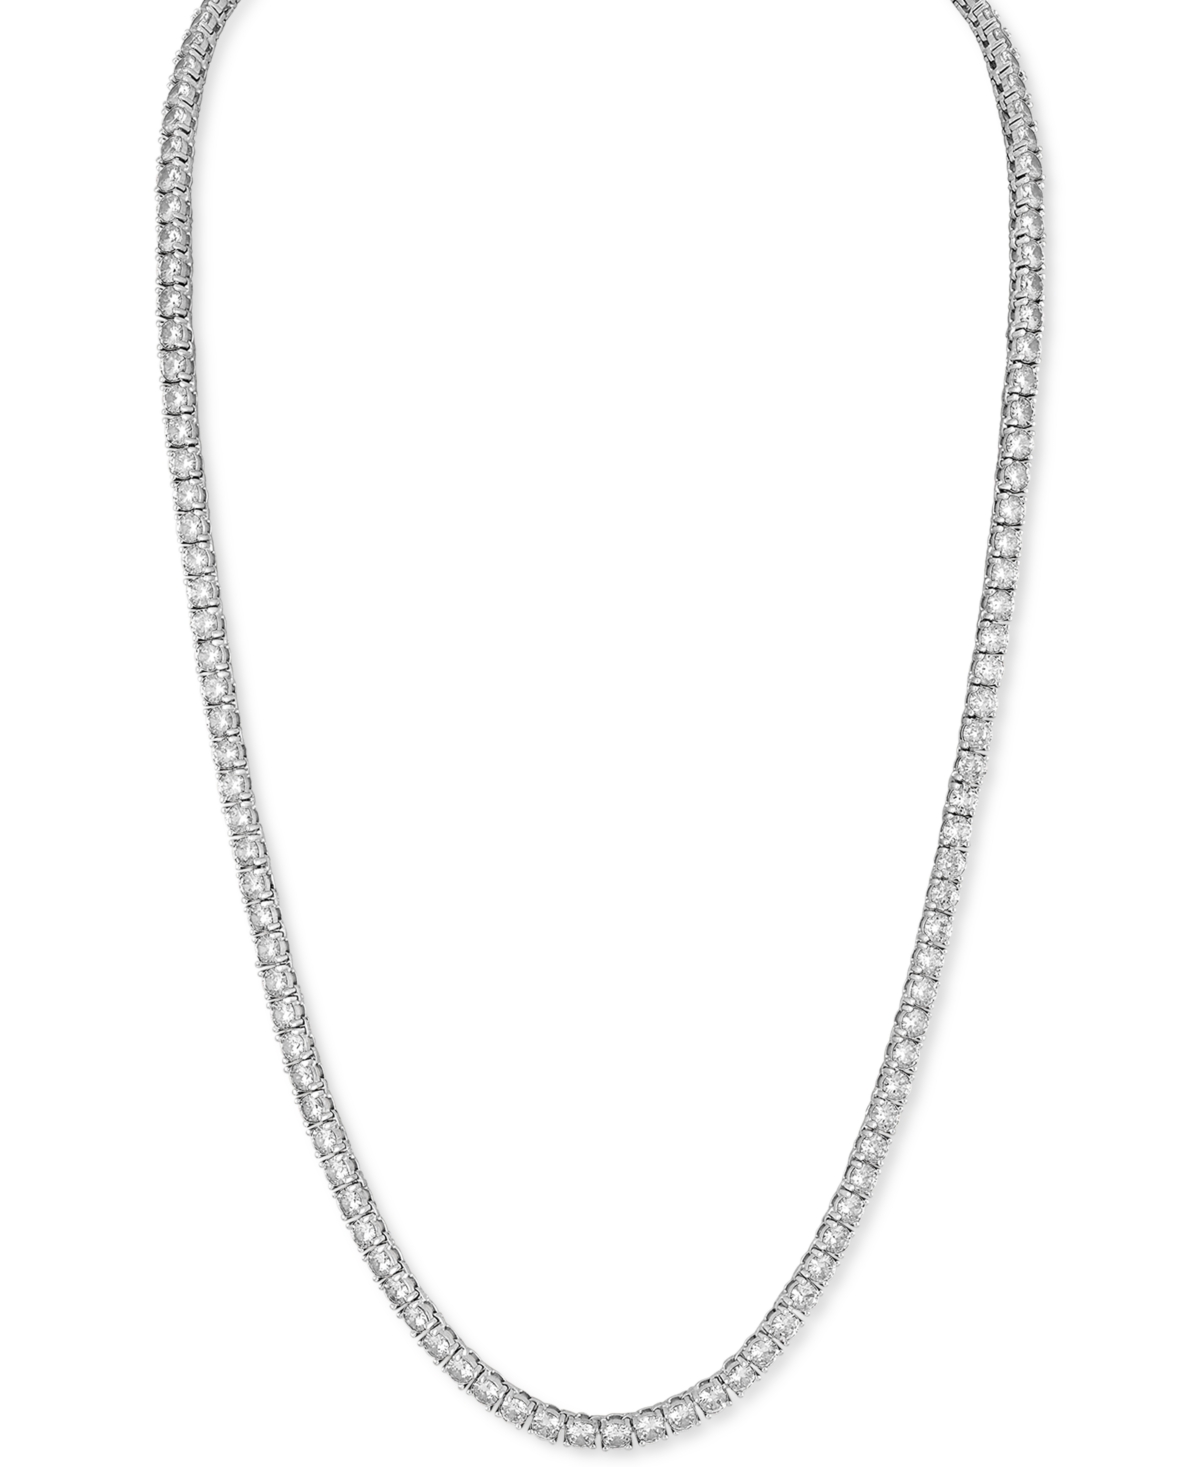 Cubic Zirconia (4mm) Tennis Necklace 22" (Also in Black Spinel), Created for Macy's - Cubic Zirconia/Silver